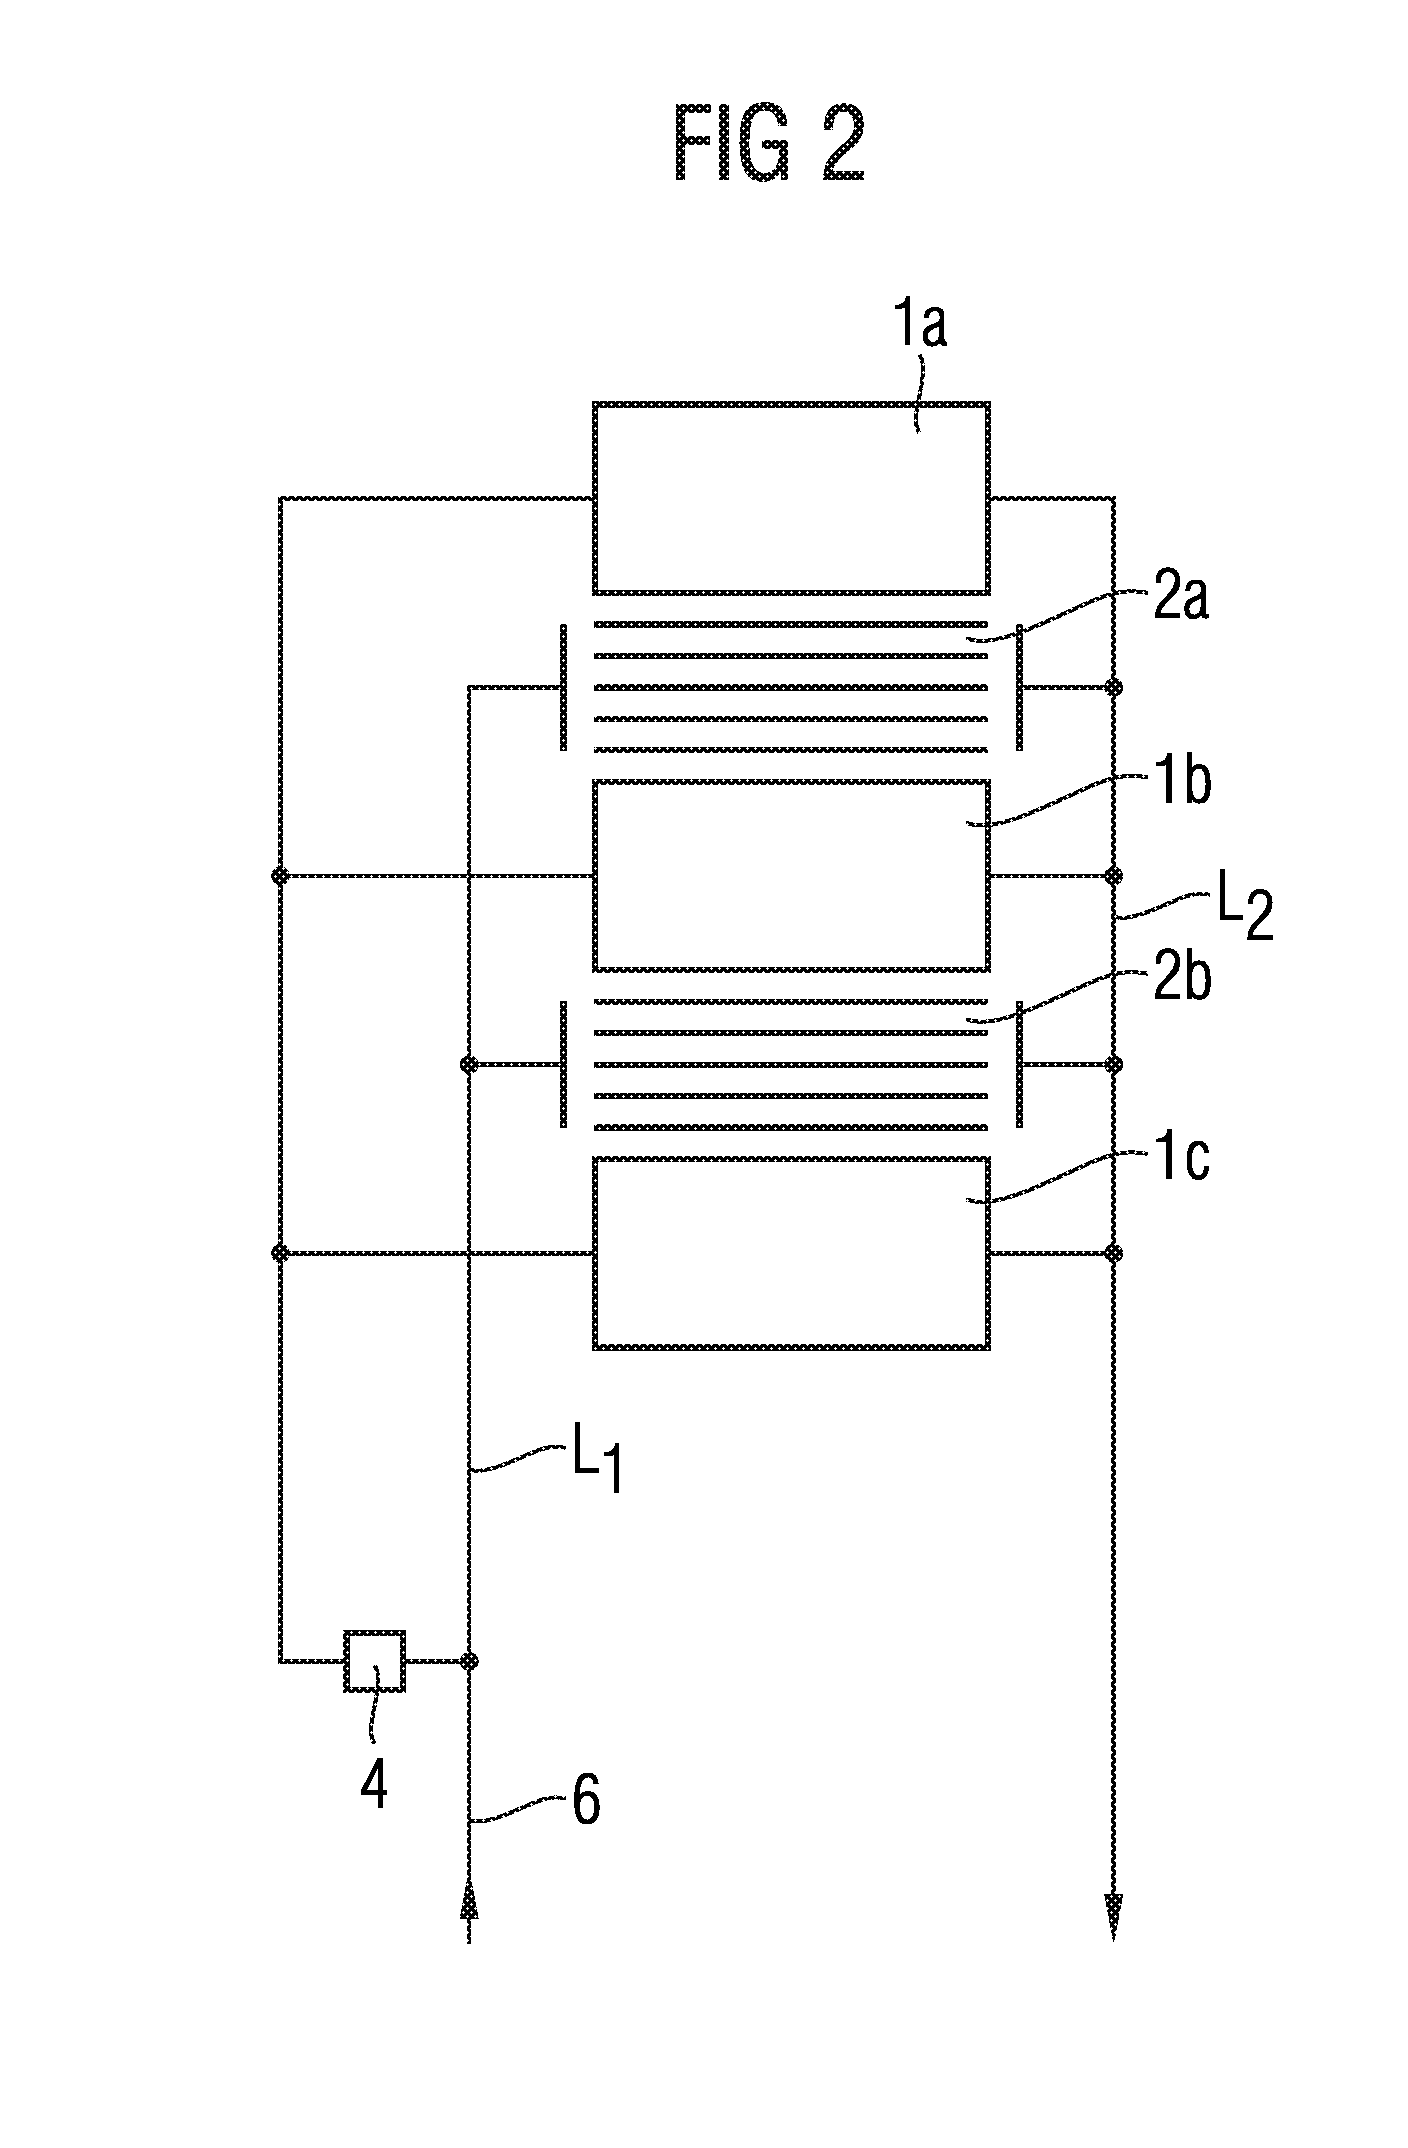 Energy storage device and method for the reversible storage of energy